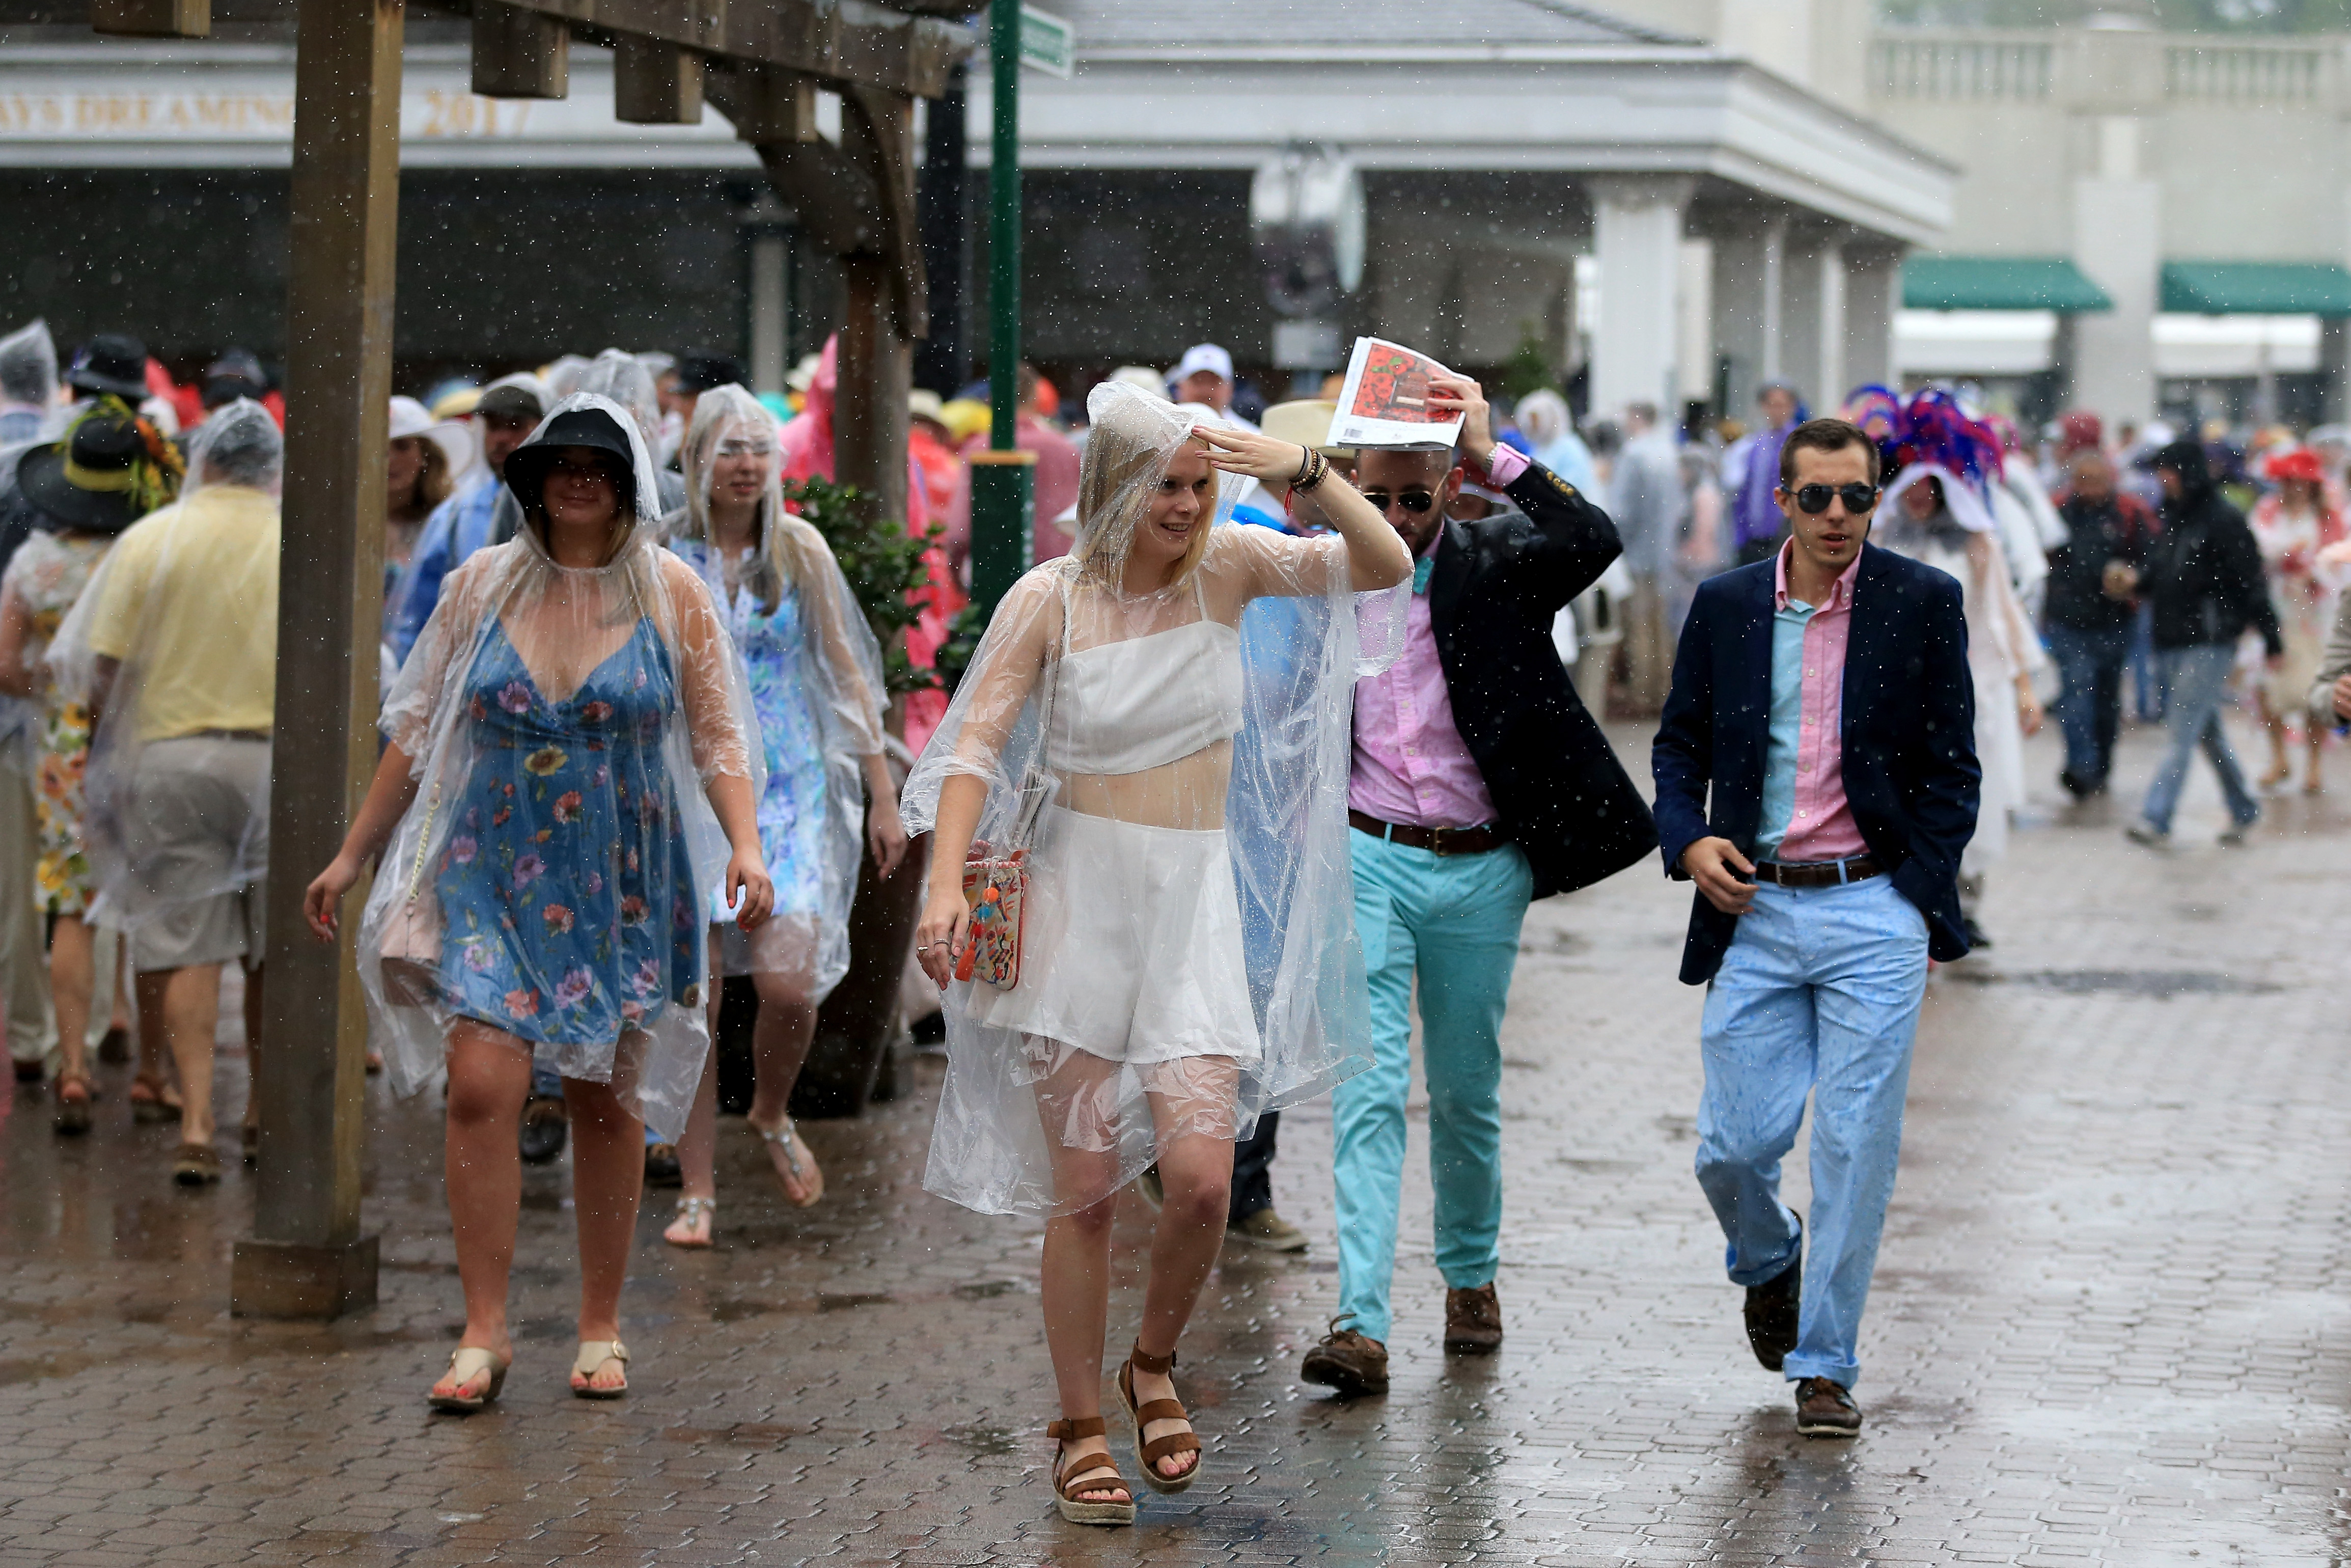 Patrons deal with rain prior to the 144th running of the Kentucky Derby at Churchill Downs on May 5, 2018 in Louisville (Sean M. Haffey—Getty Images)